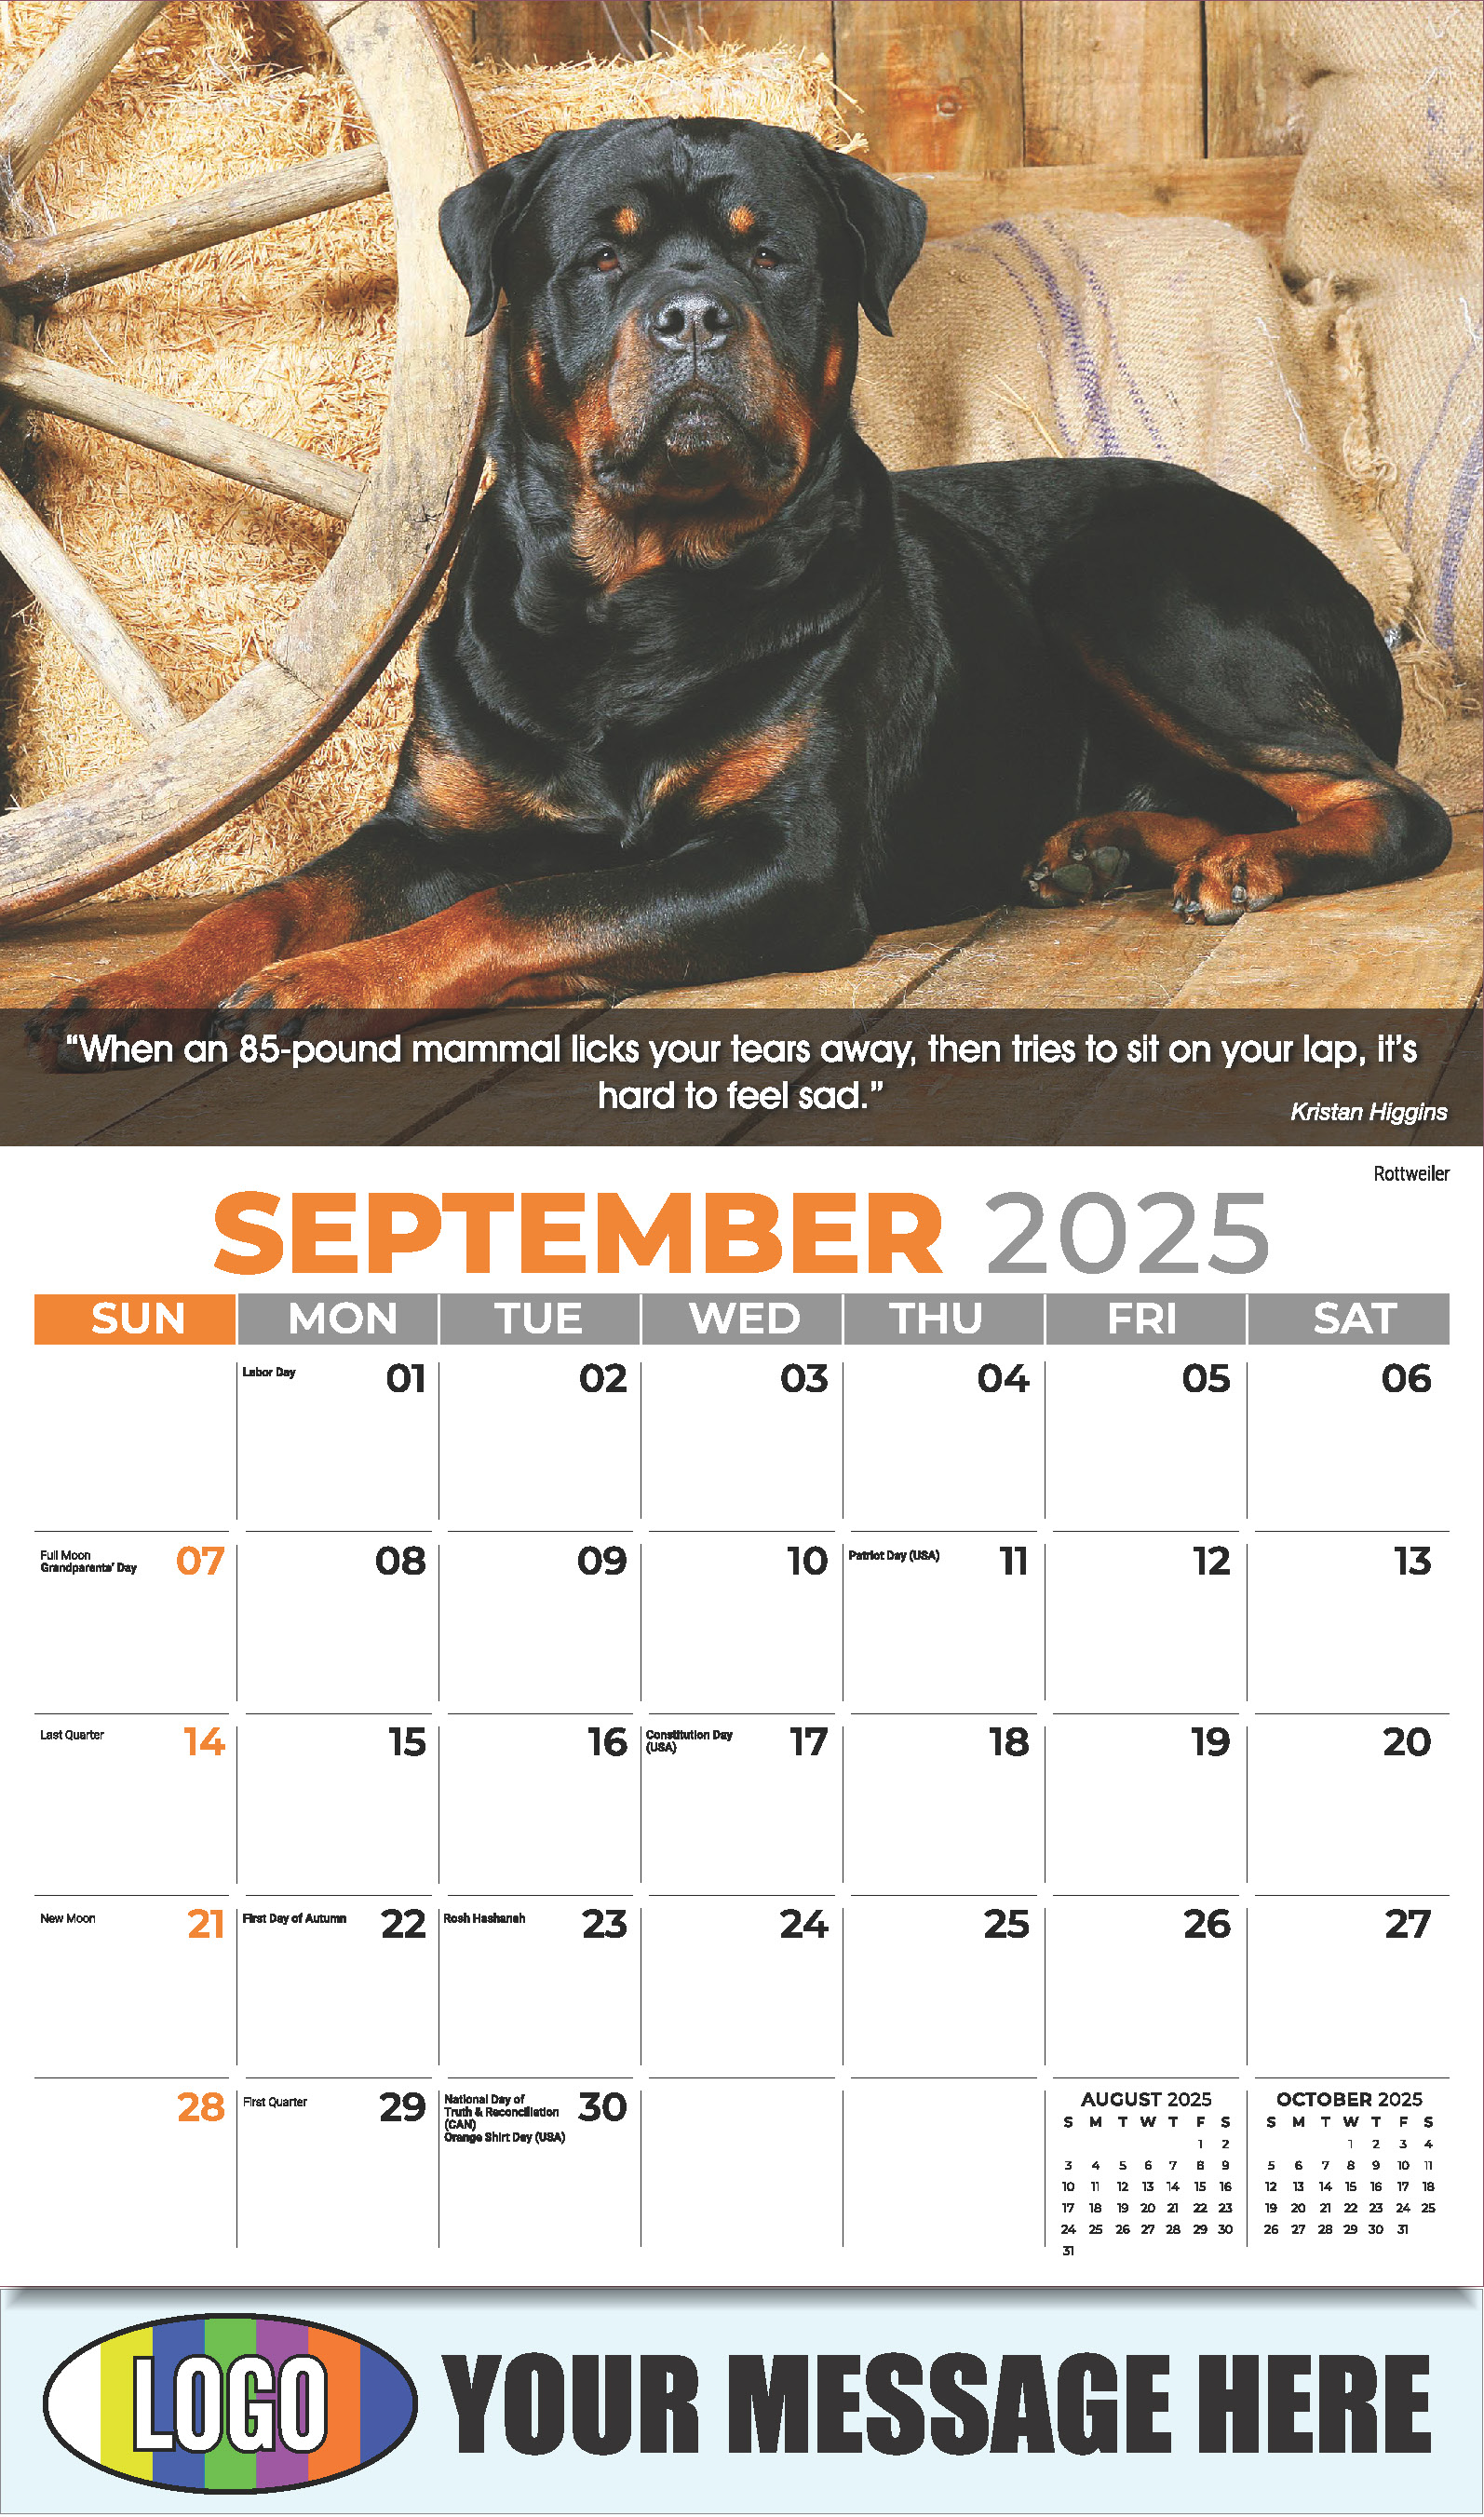 Dogs 2025 Vets and Pets Business Promotion Calendar - September